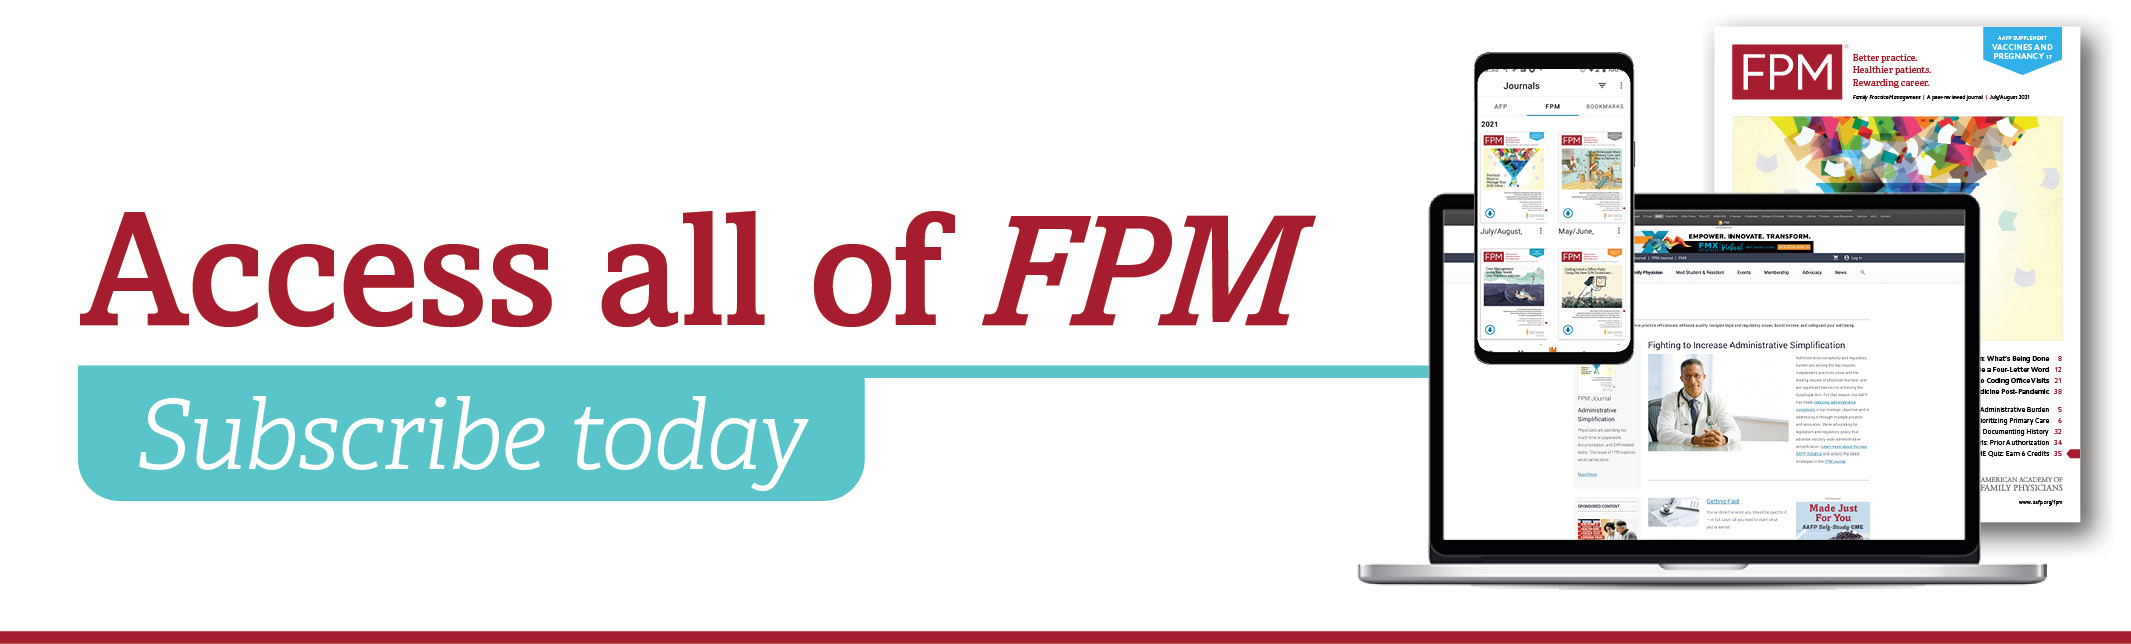 Access all of FPM